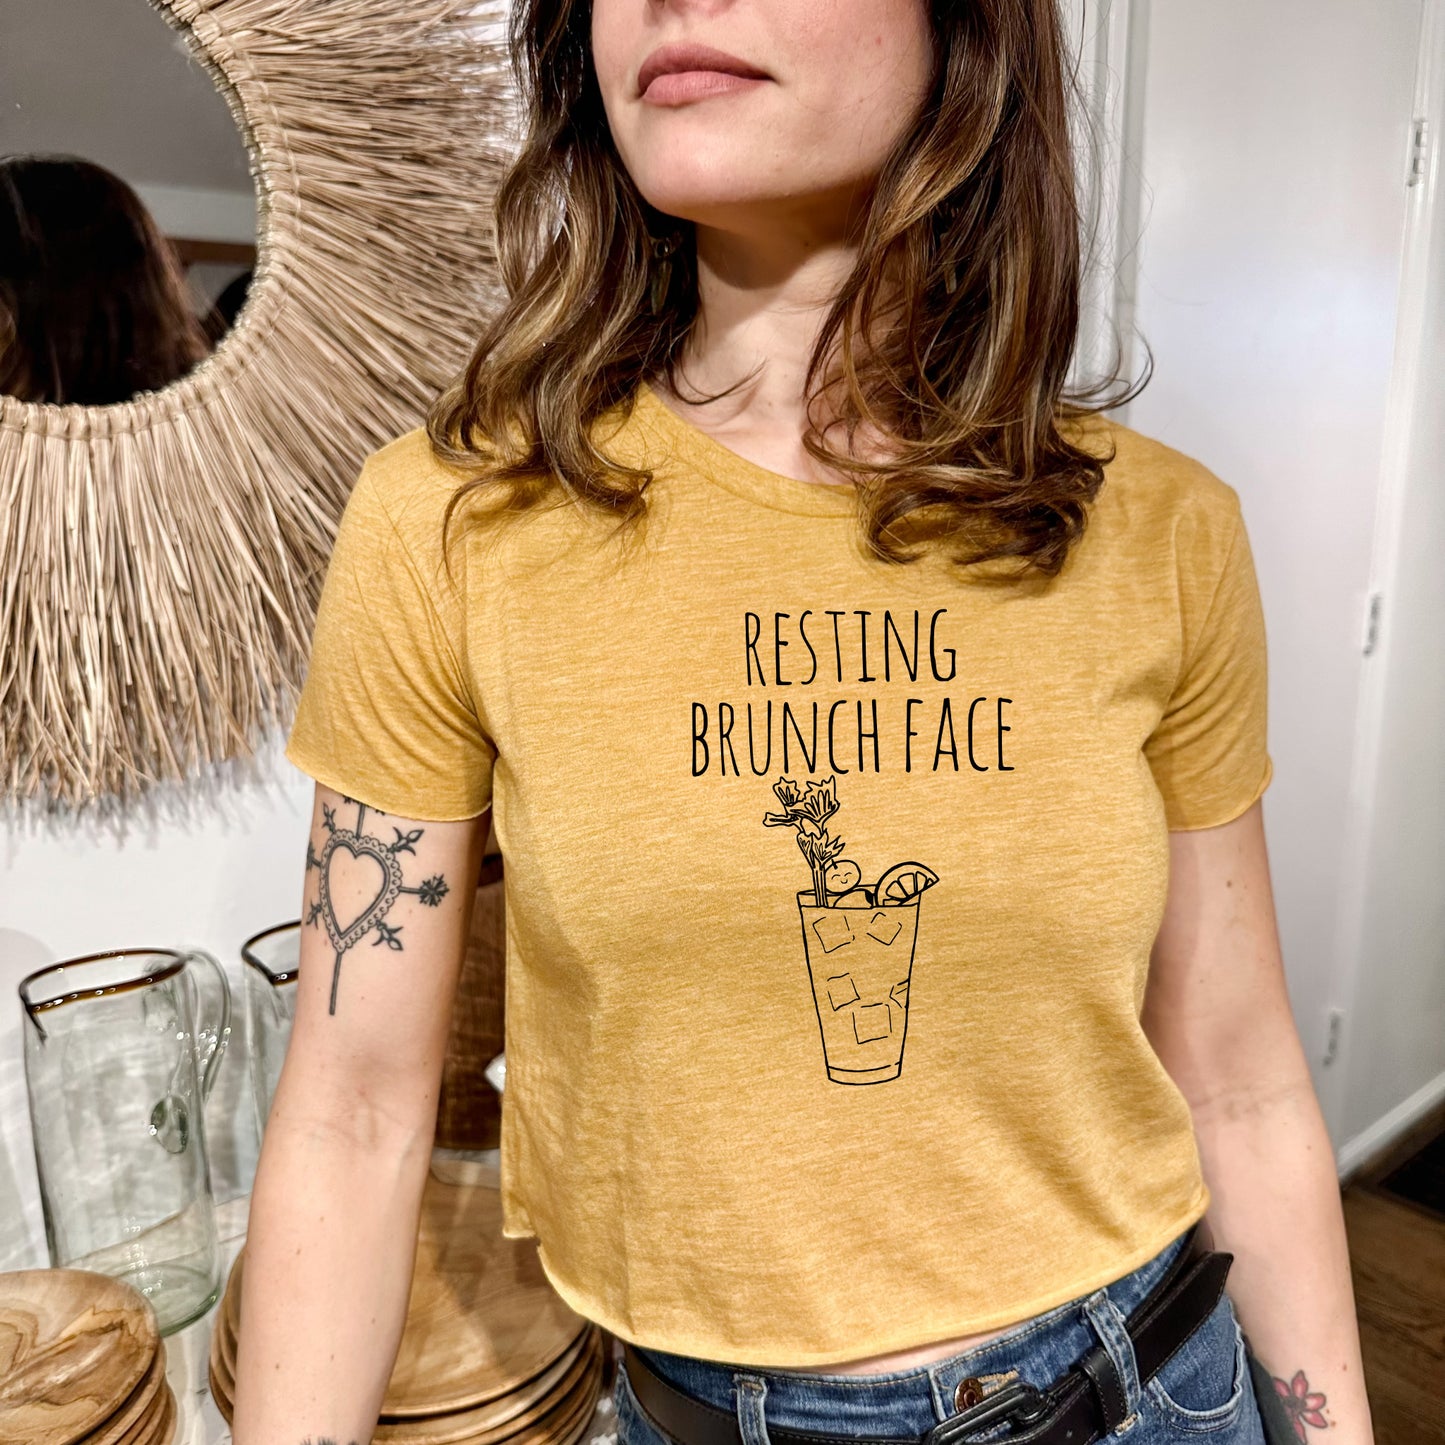 Resting Brunch Face - Women's Crop Tee - Heather Gray or Gold